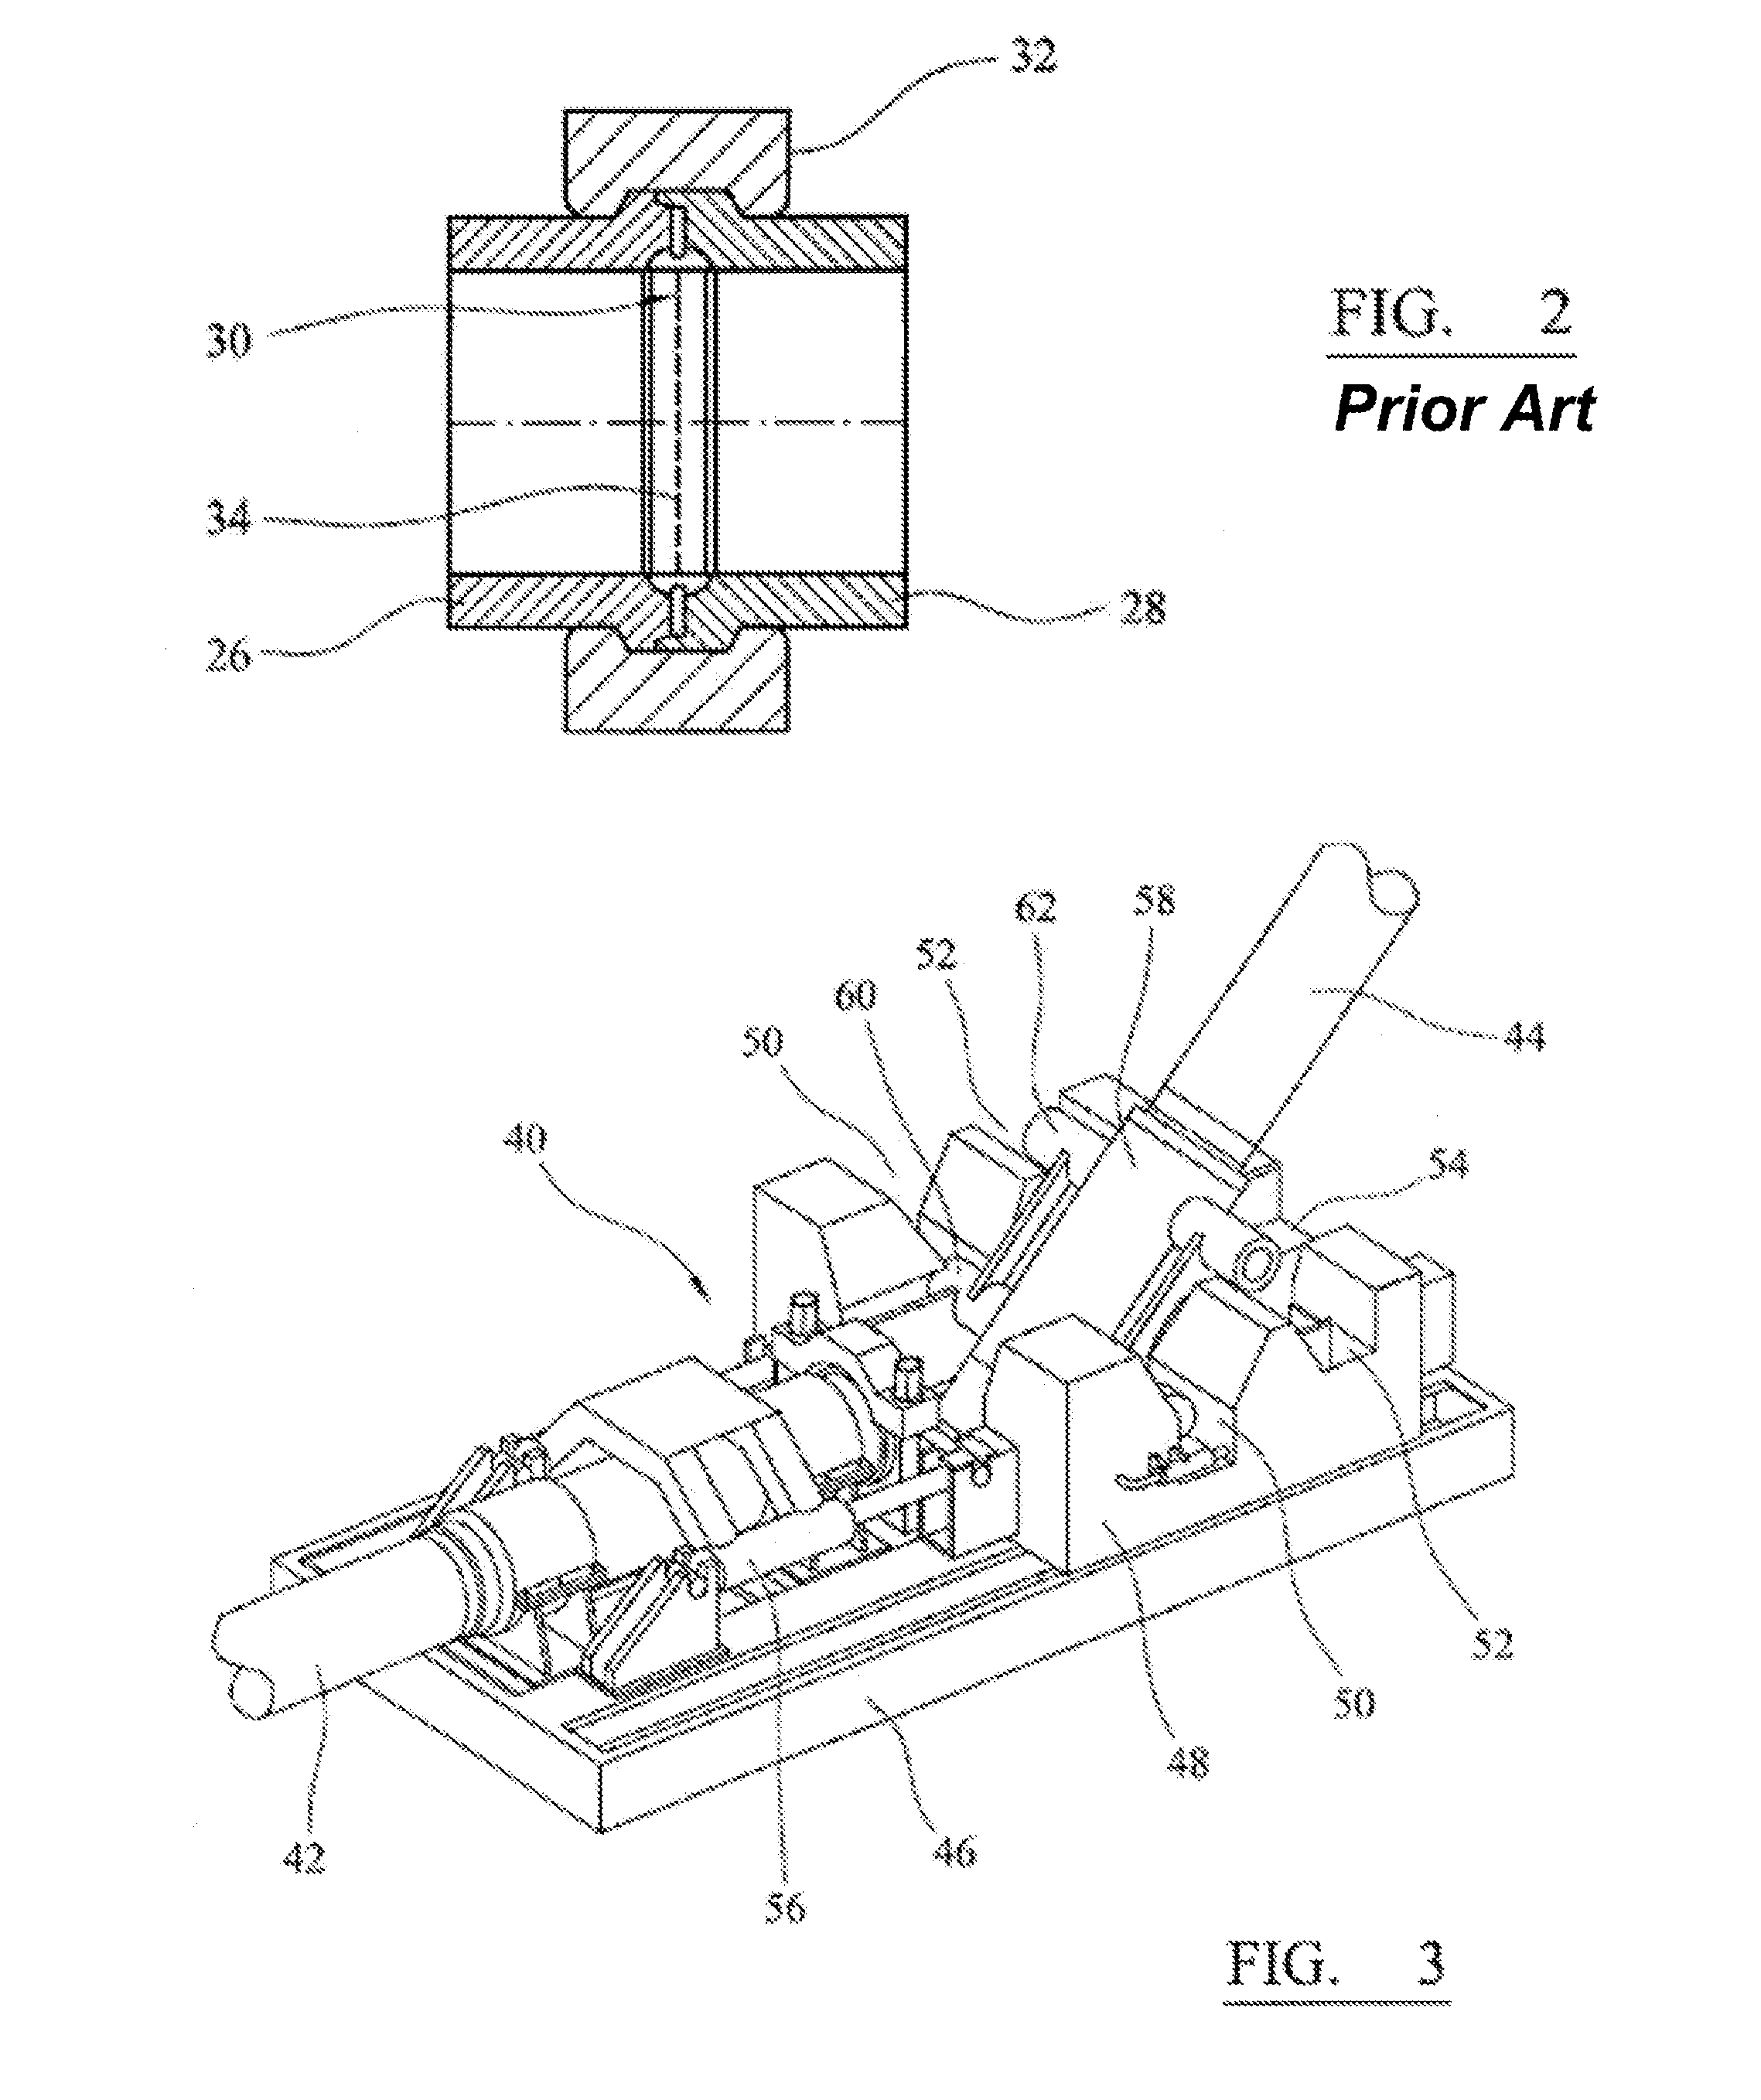 Apparatus and method for the connection of conduits